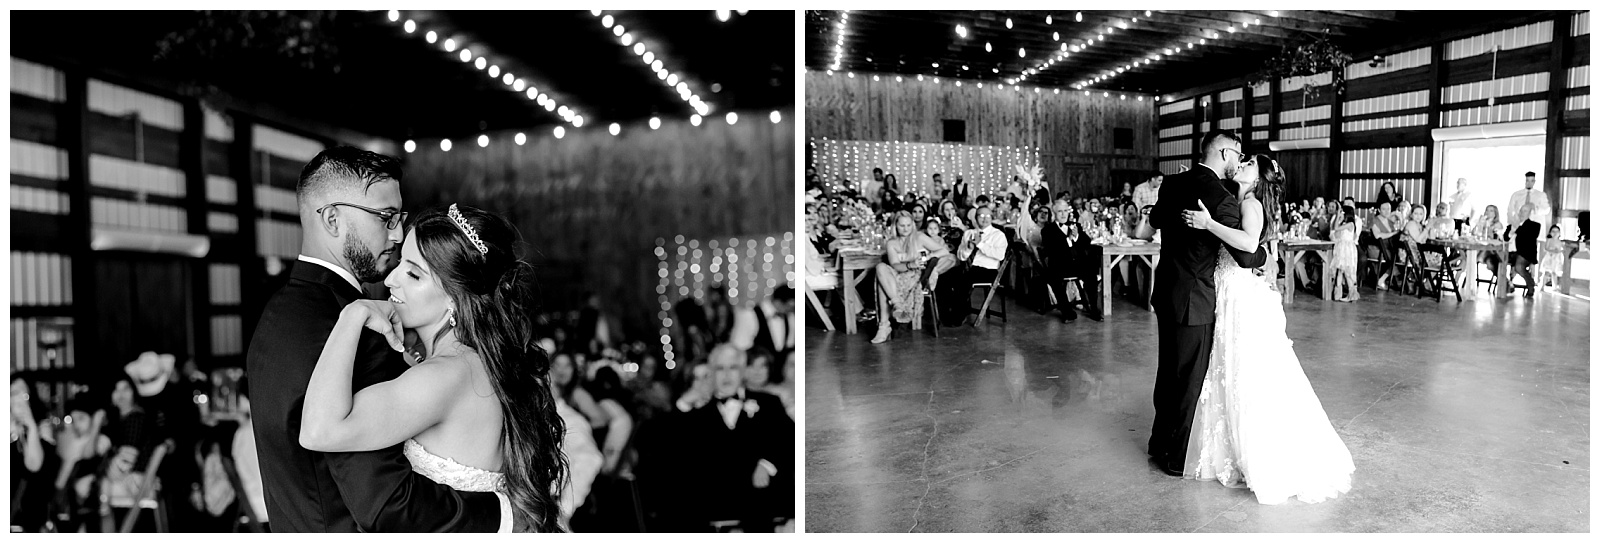 Black and white side by sides show the bride and groom nuzzling close during their first dance at The Allen Farmhaus Wedding, TX by San Antonio-Maui-Destination Wedding Photographer | Monica Roberts Photography | www.monicaroberts.com